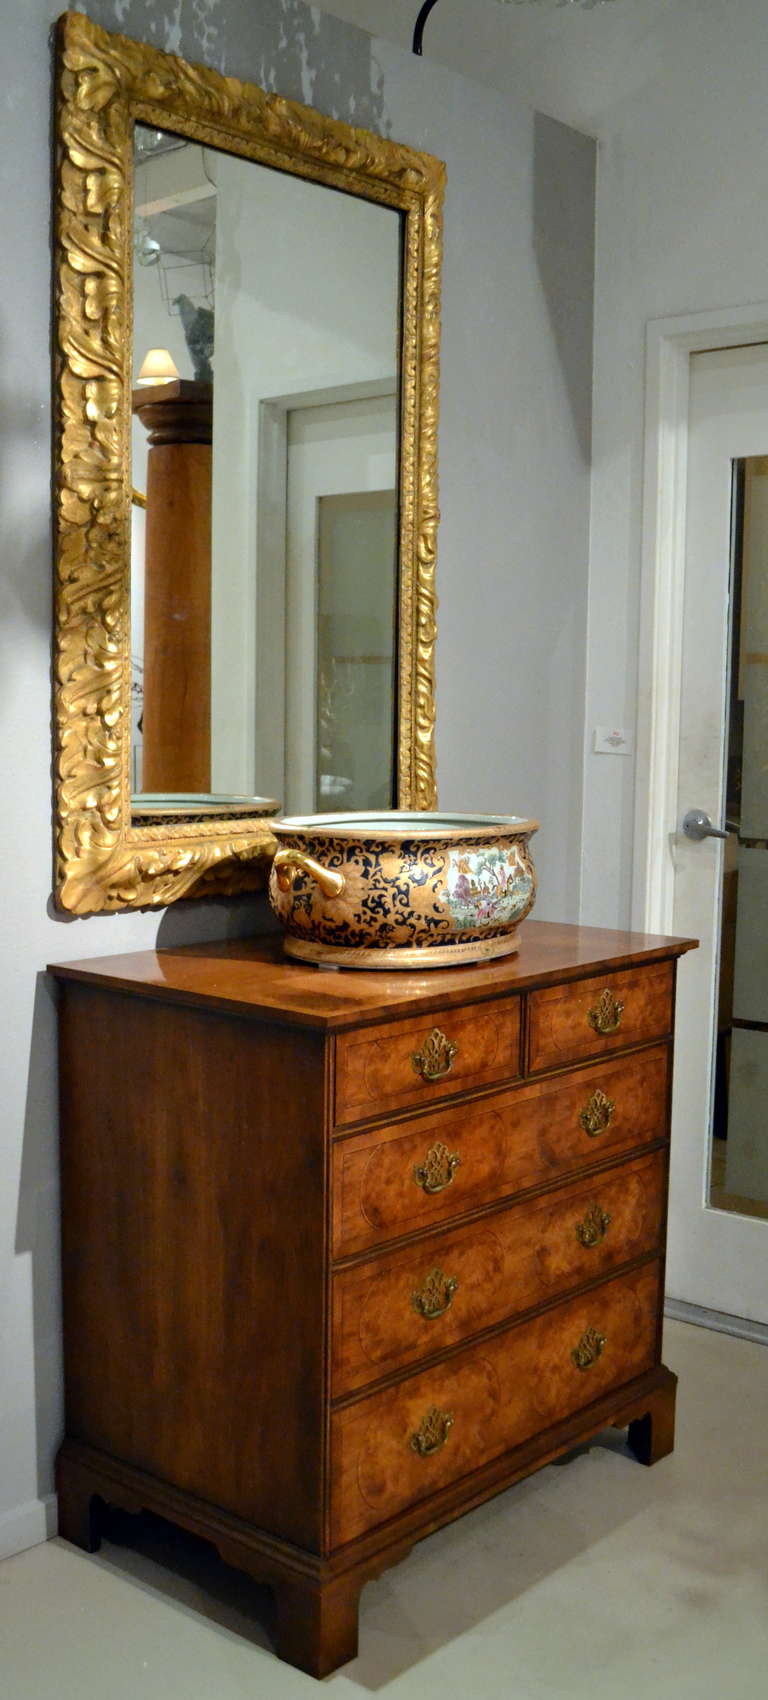 Impressive 19th Century Carved Wood and Gilt Mirror 3